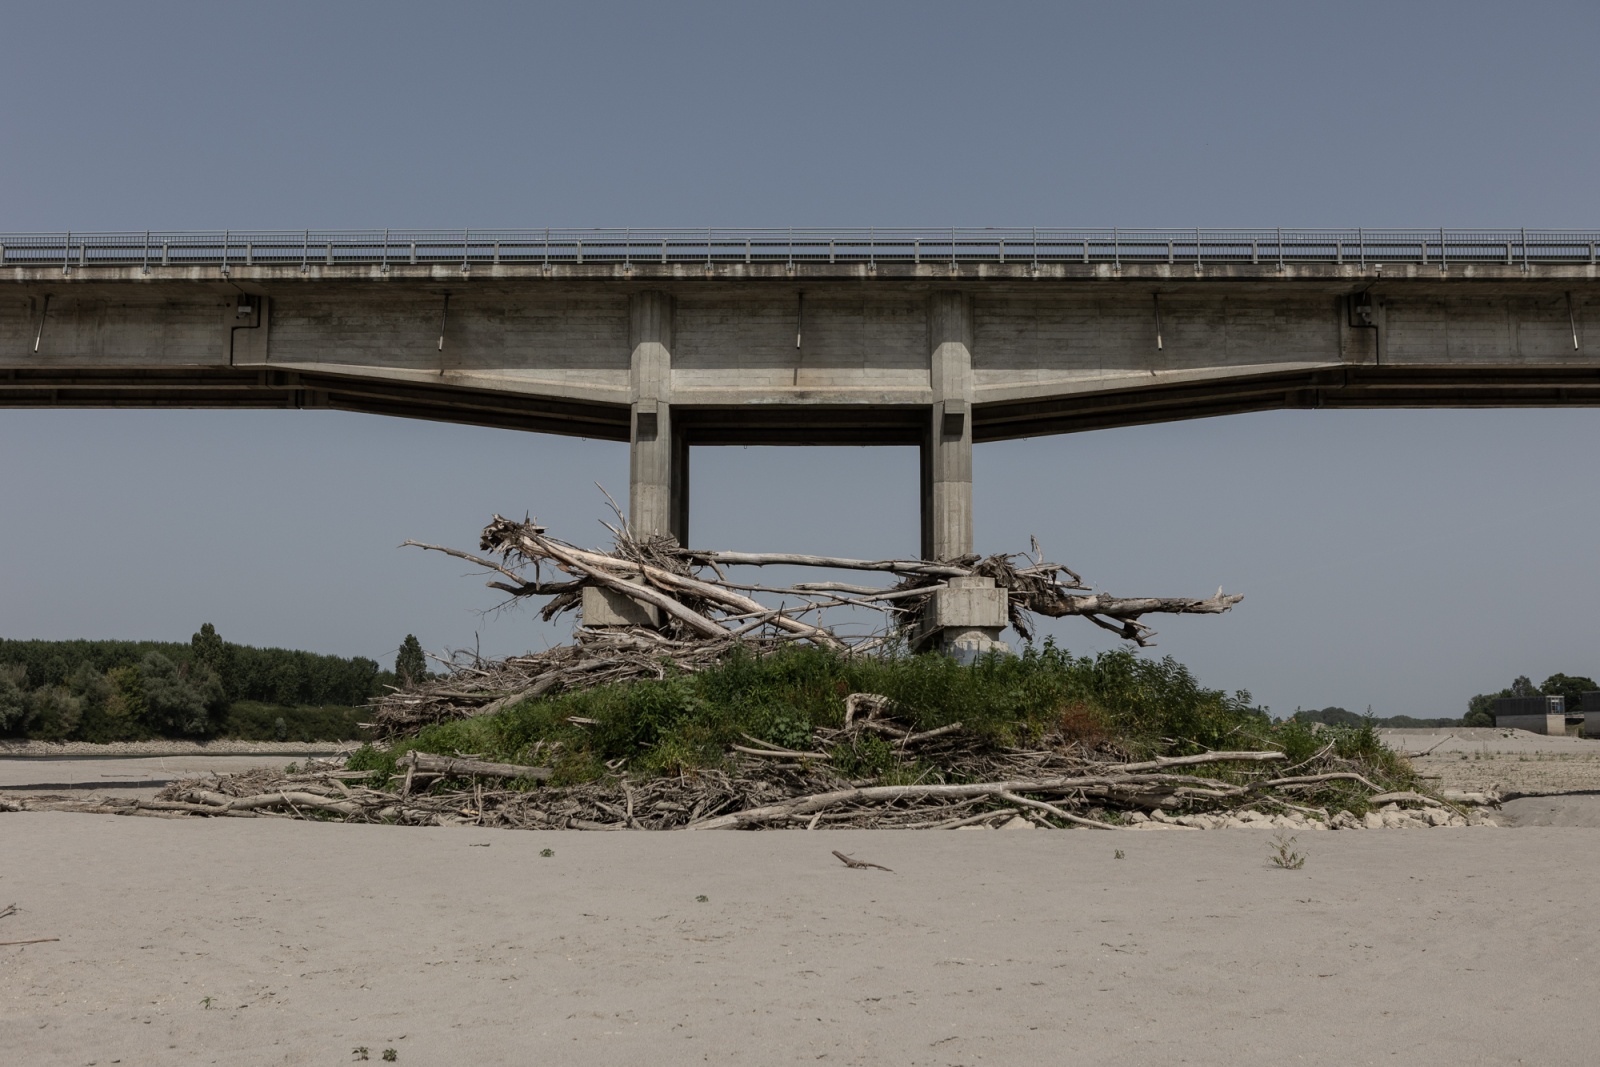 EMILIA ROMAGNA, ITALY - JUNE 2022 - One of the pylons of the bridge that crosses the river Po in the municipality of Boretto, in the province of Reggio Emilia, Italy on June 27, 2022. The branches and trees found meters from the river bed indicate the level that the river water normally reaches.